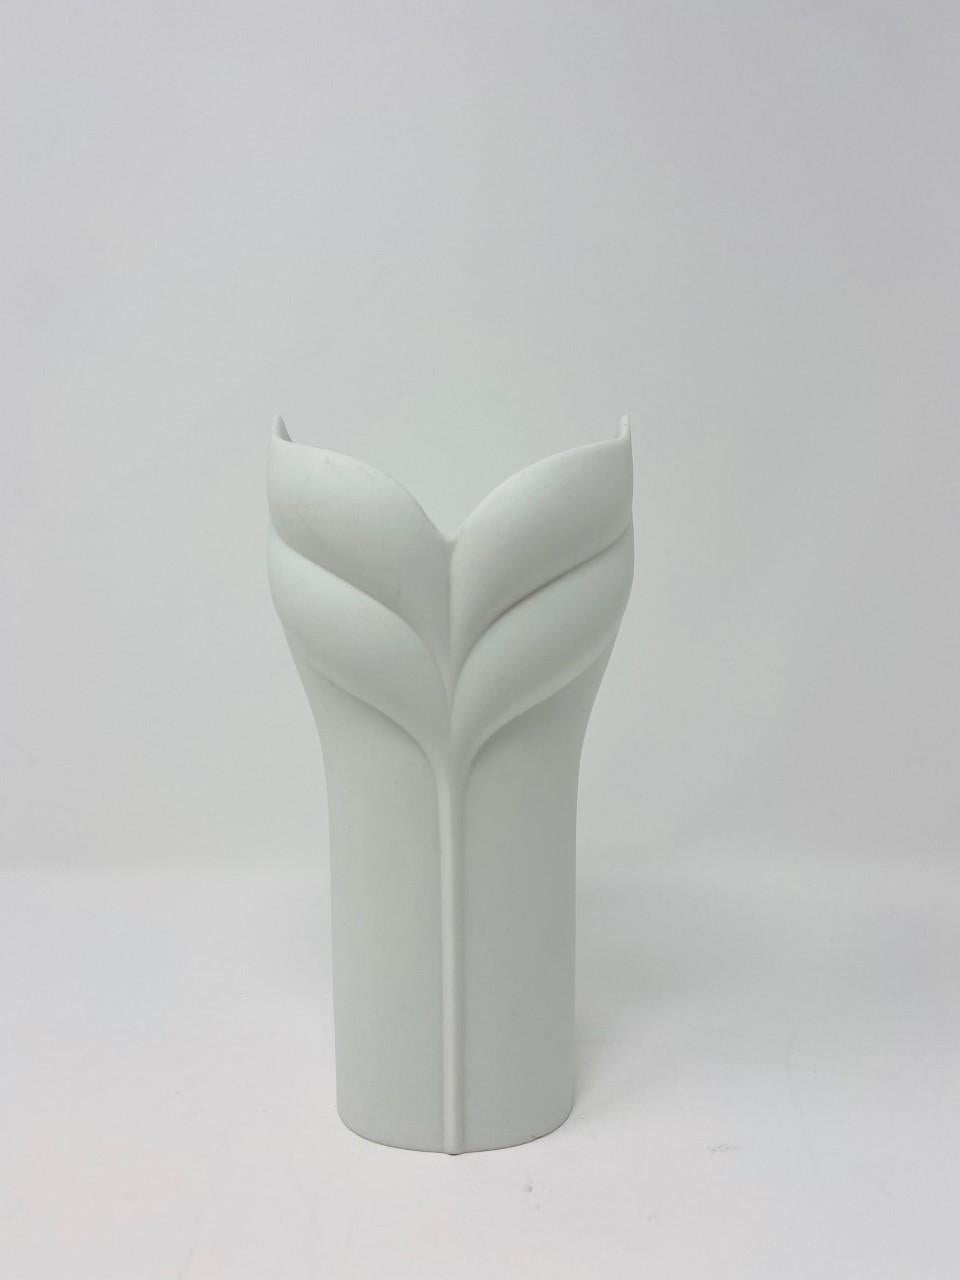 Hand-Crafted Vintage White Bisque Op Art Vase by Uta Feyl for Rosenthal For Sale